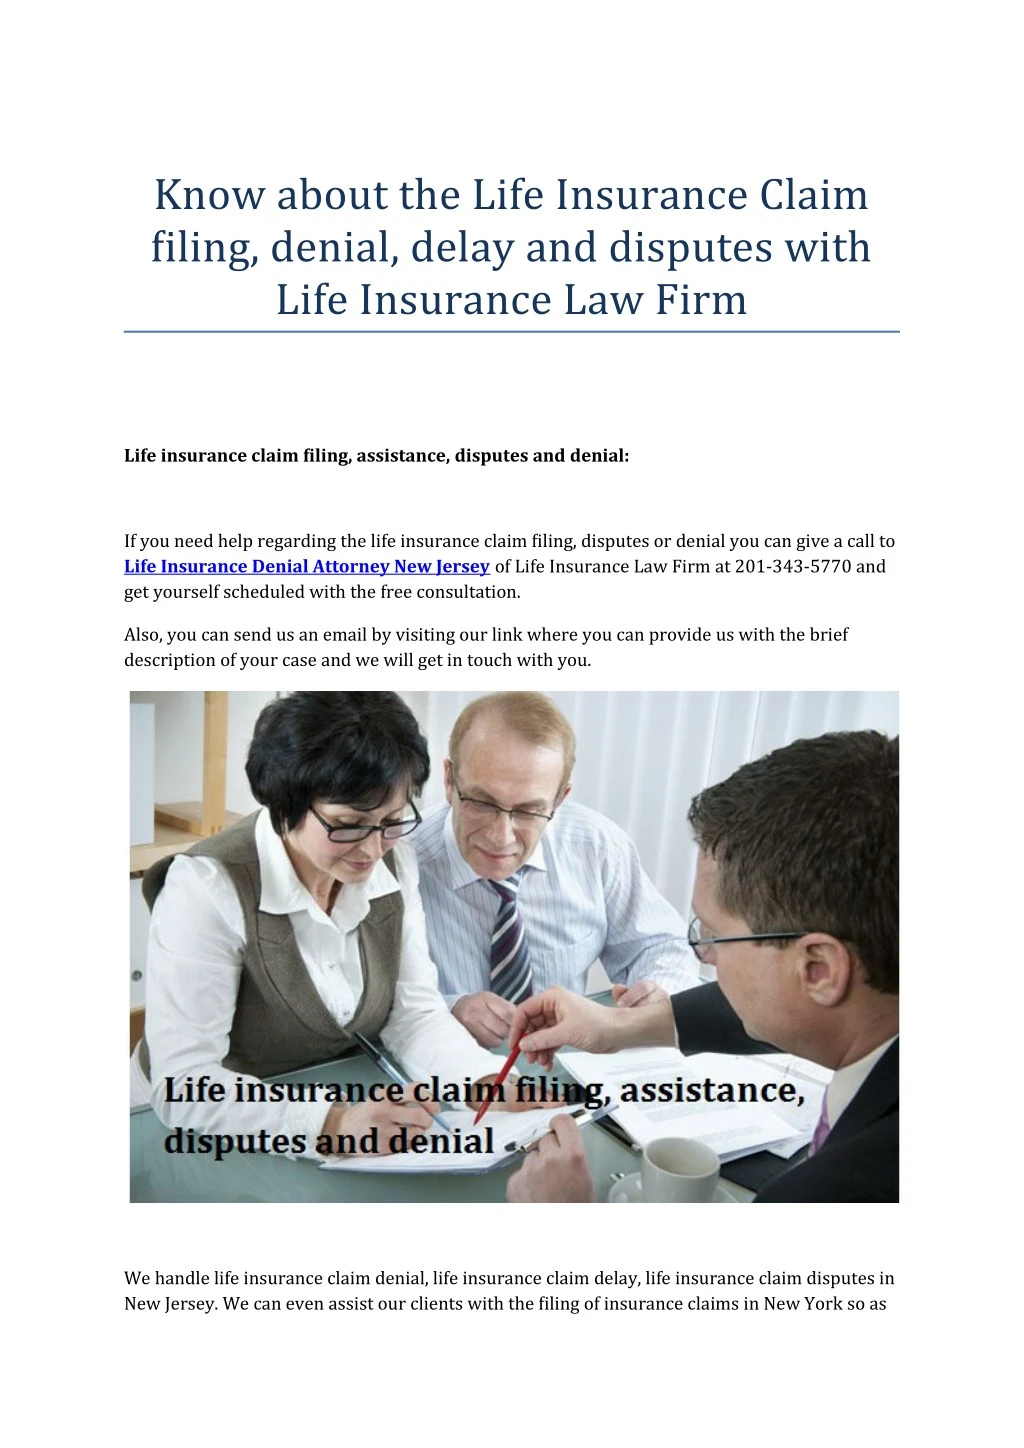 know about the life insurance claim filing denial